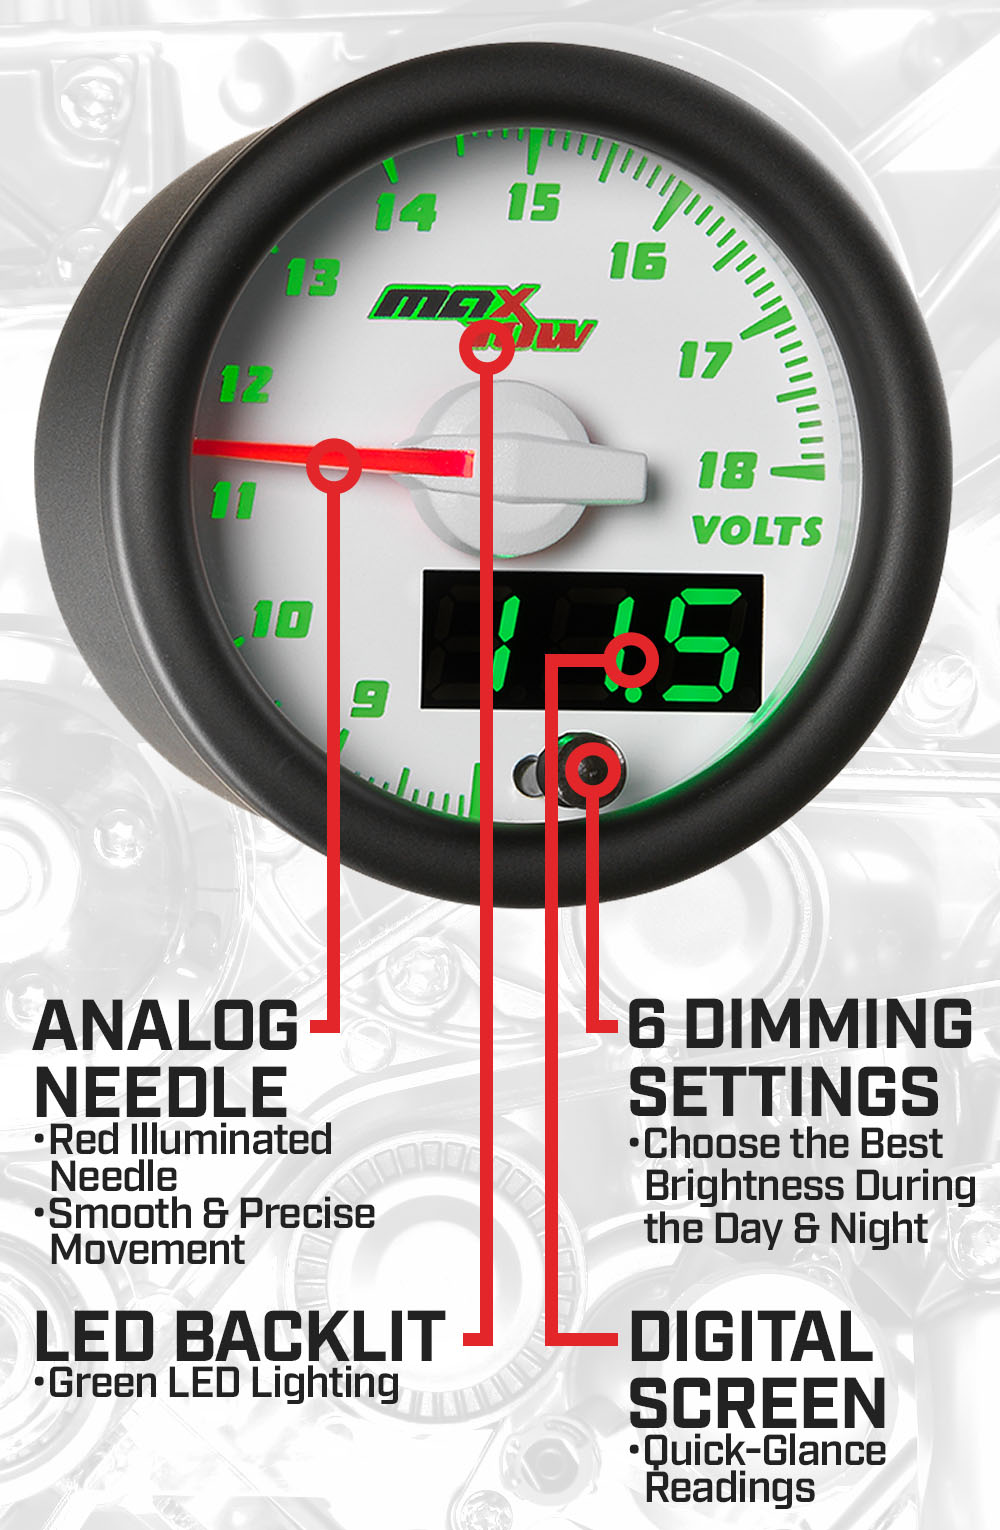 White & Green Double Vision Voltage Gauge Features